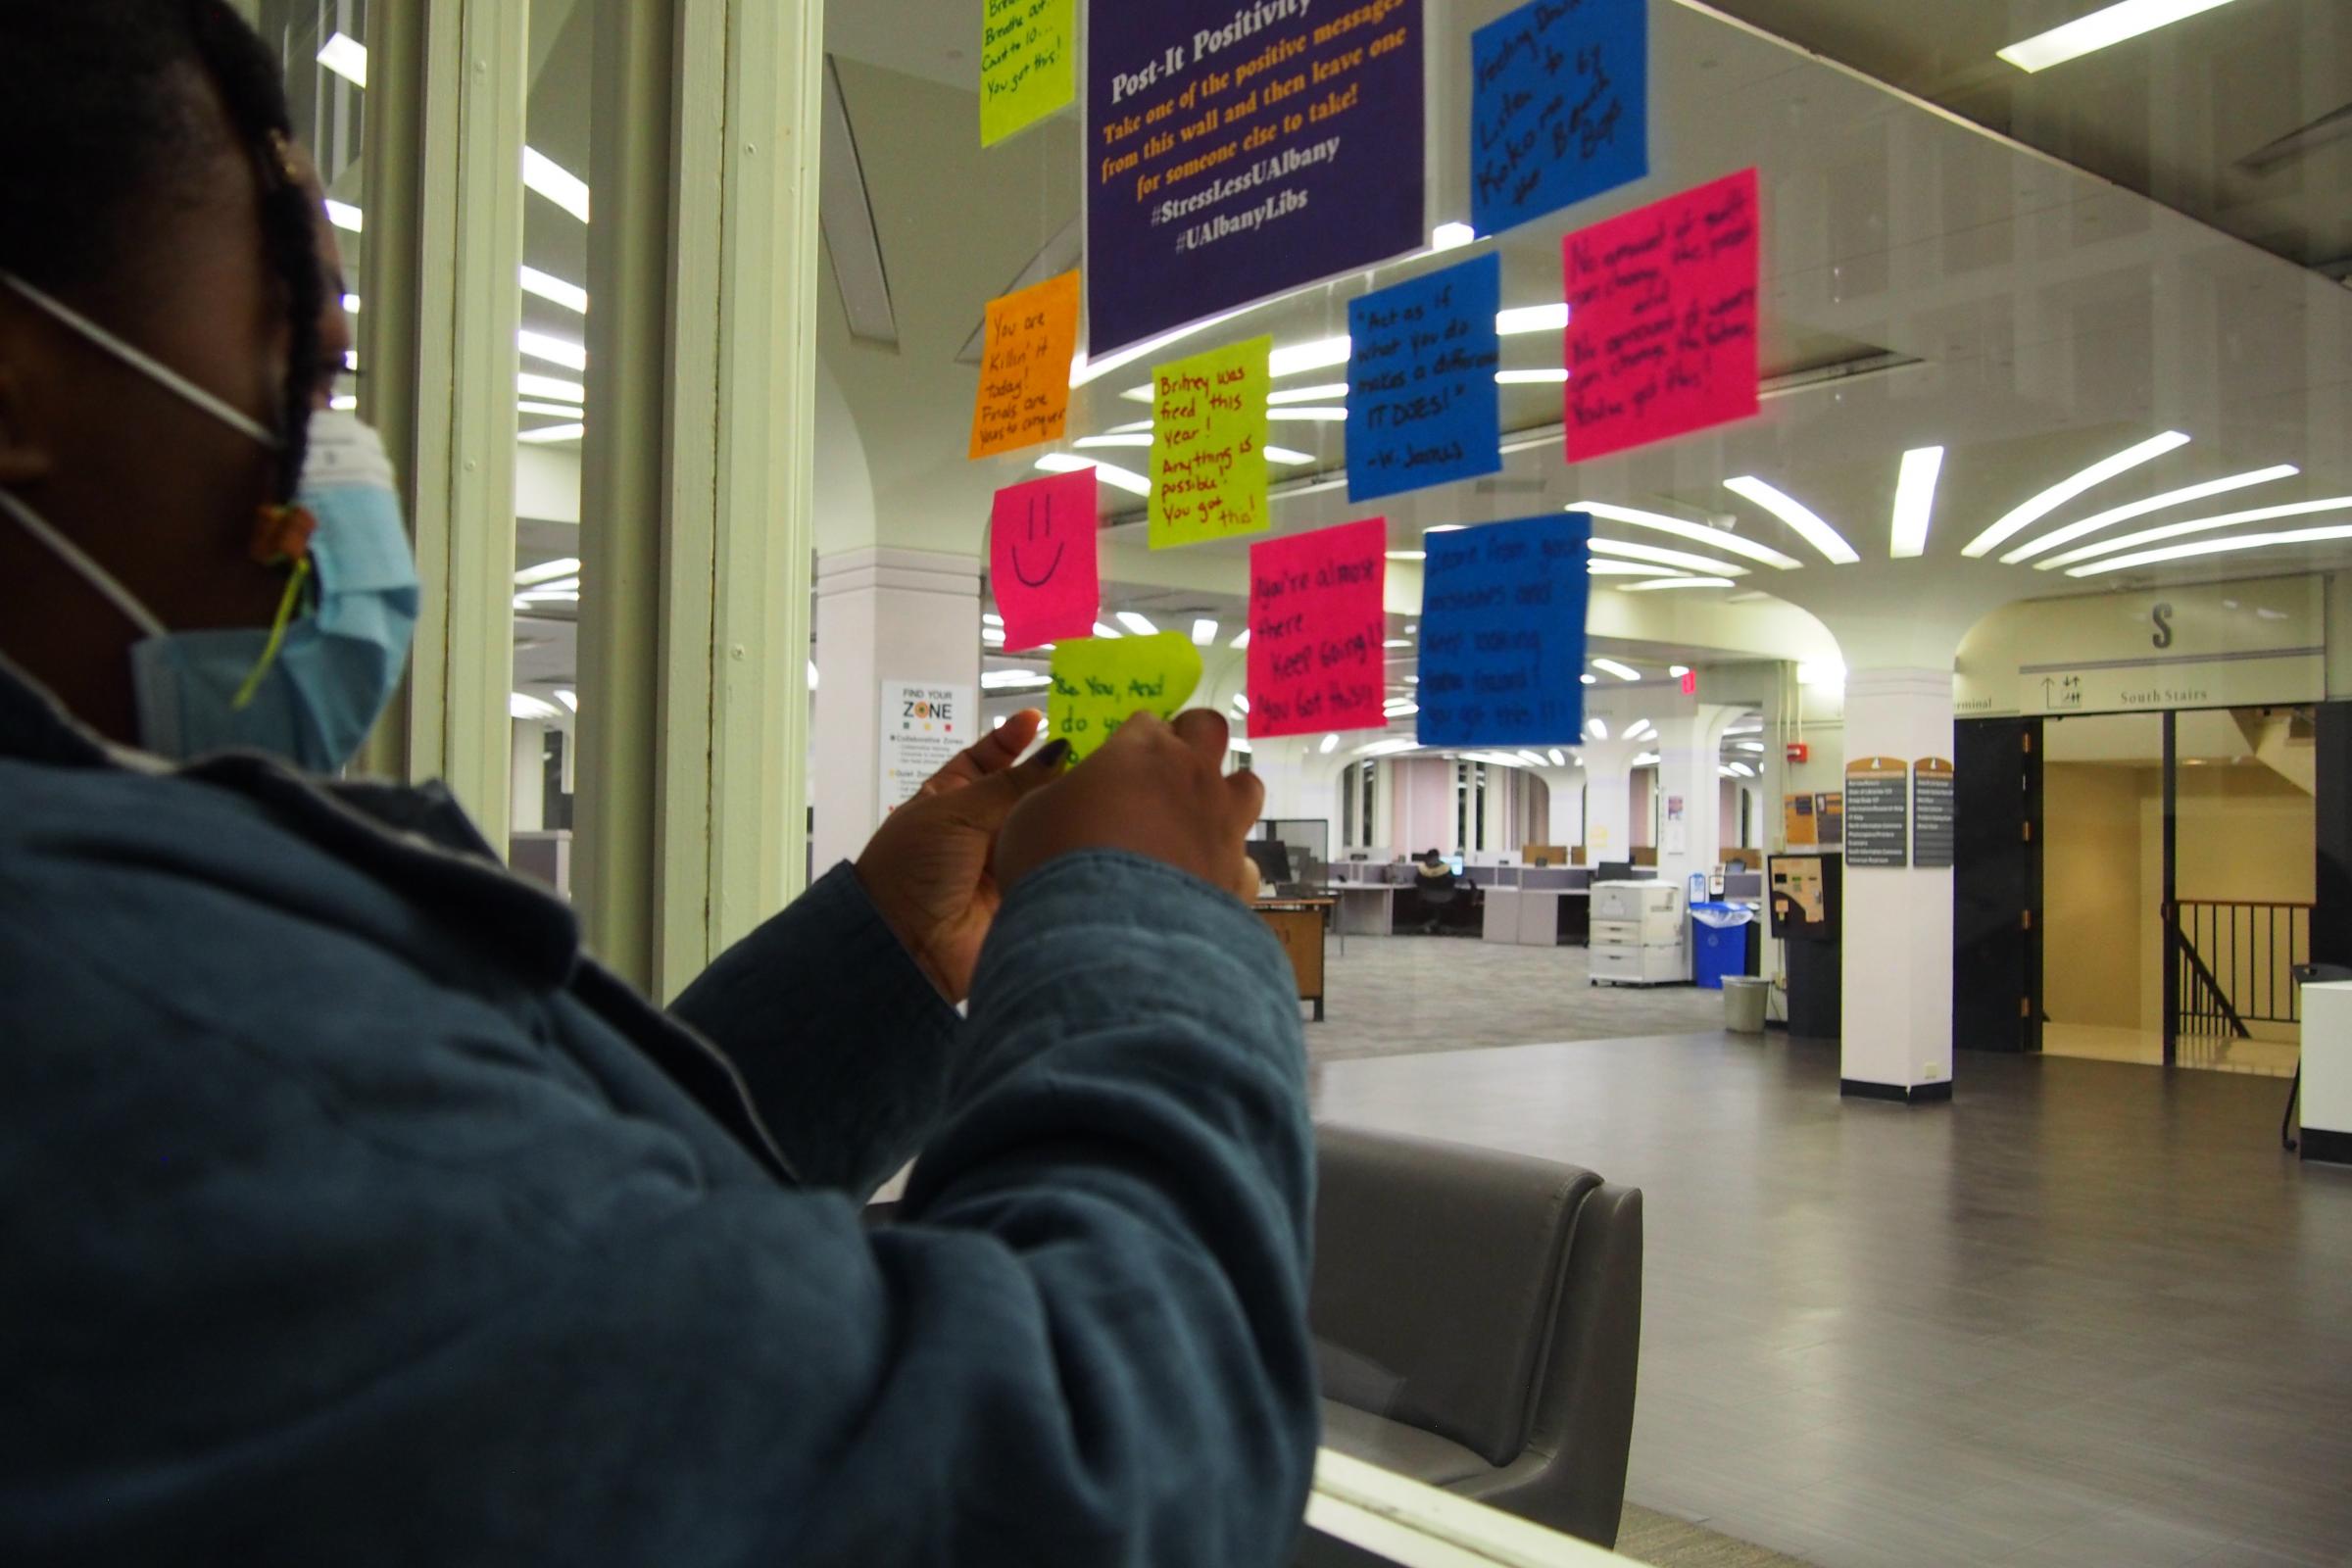 Student adds to the Post-it Positivity Wall